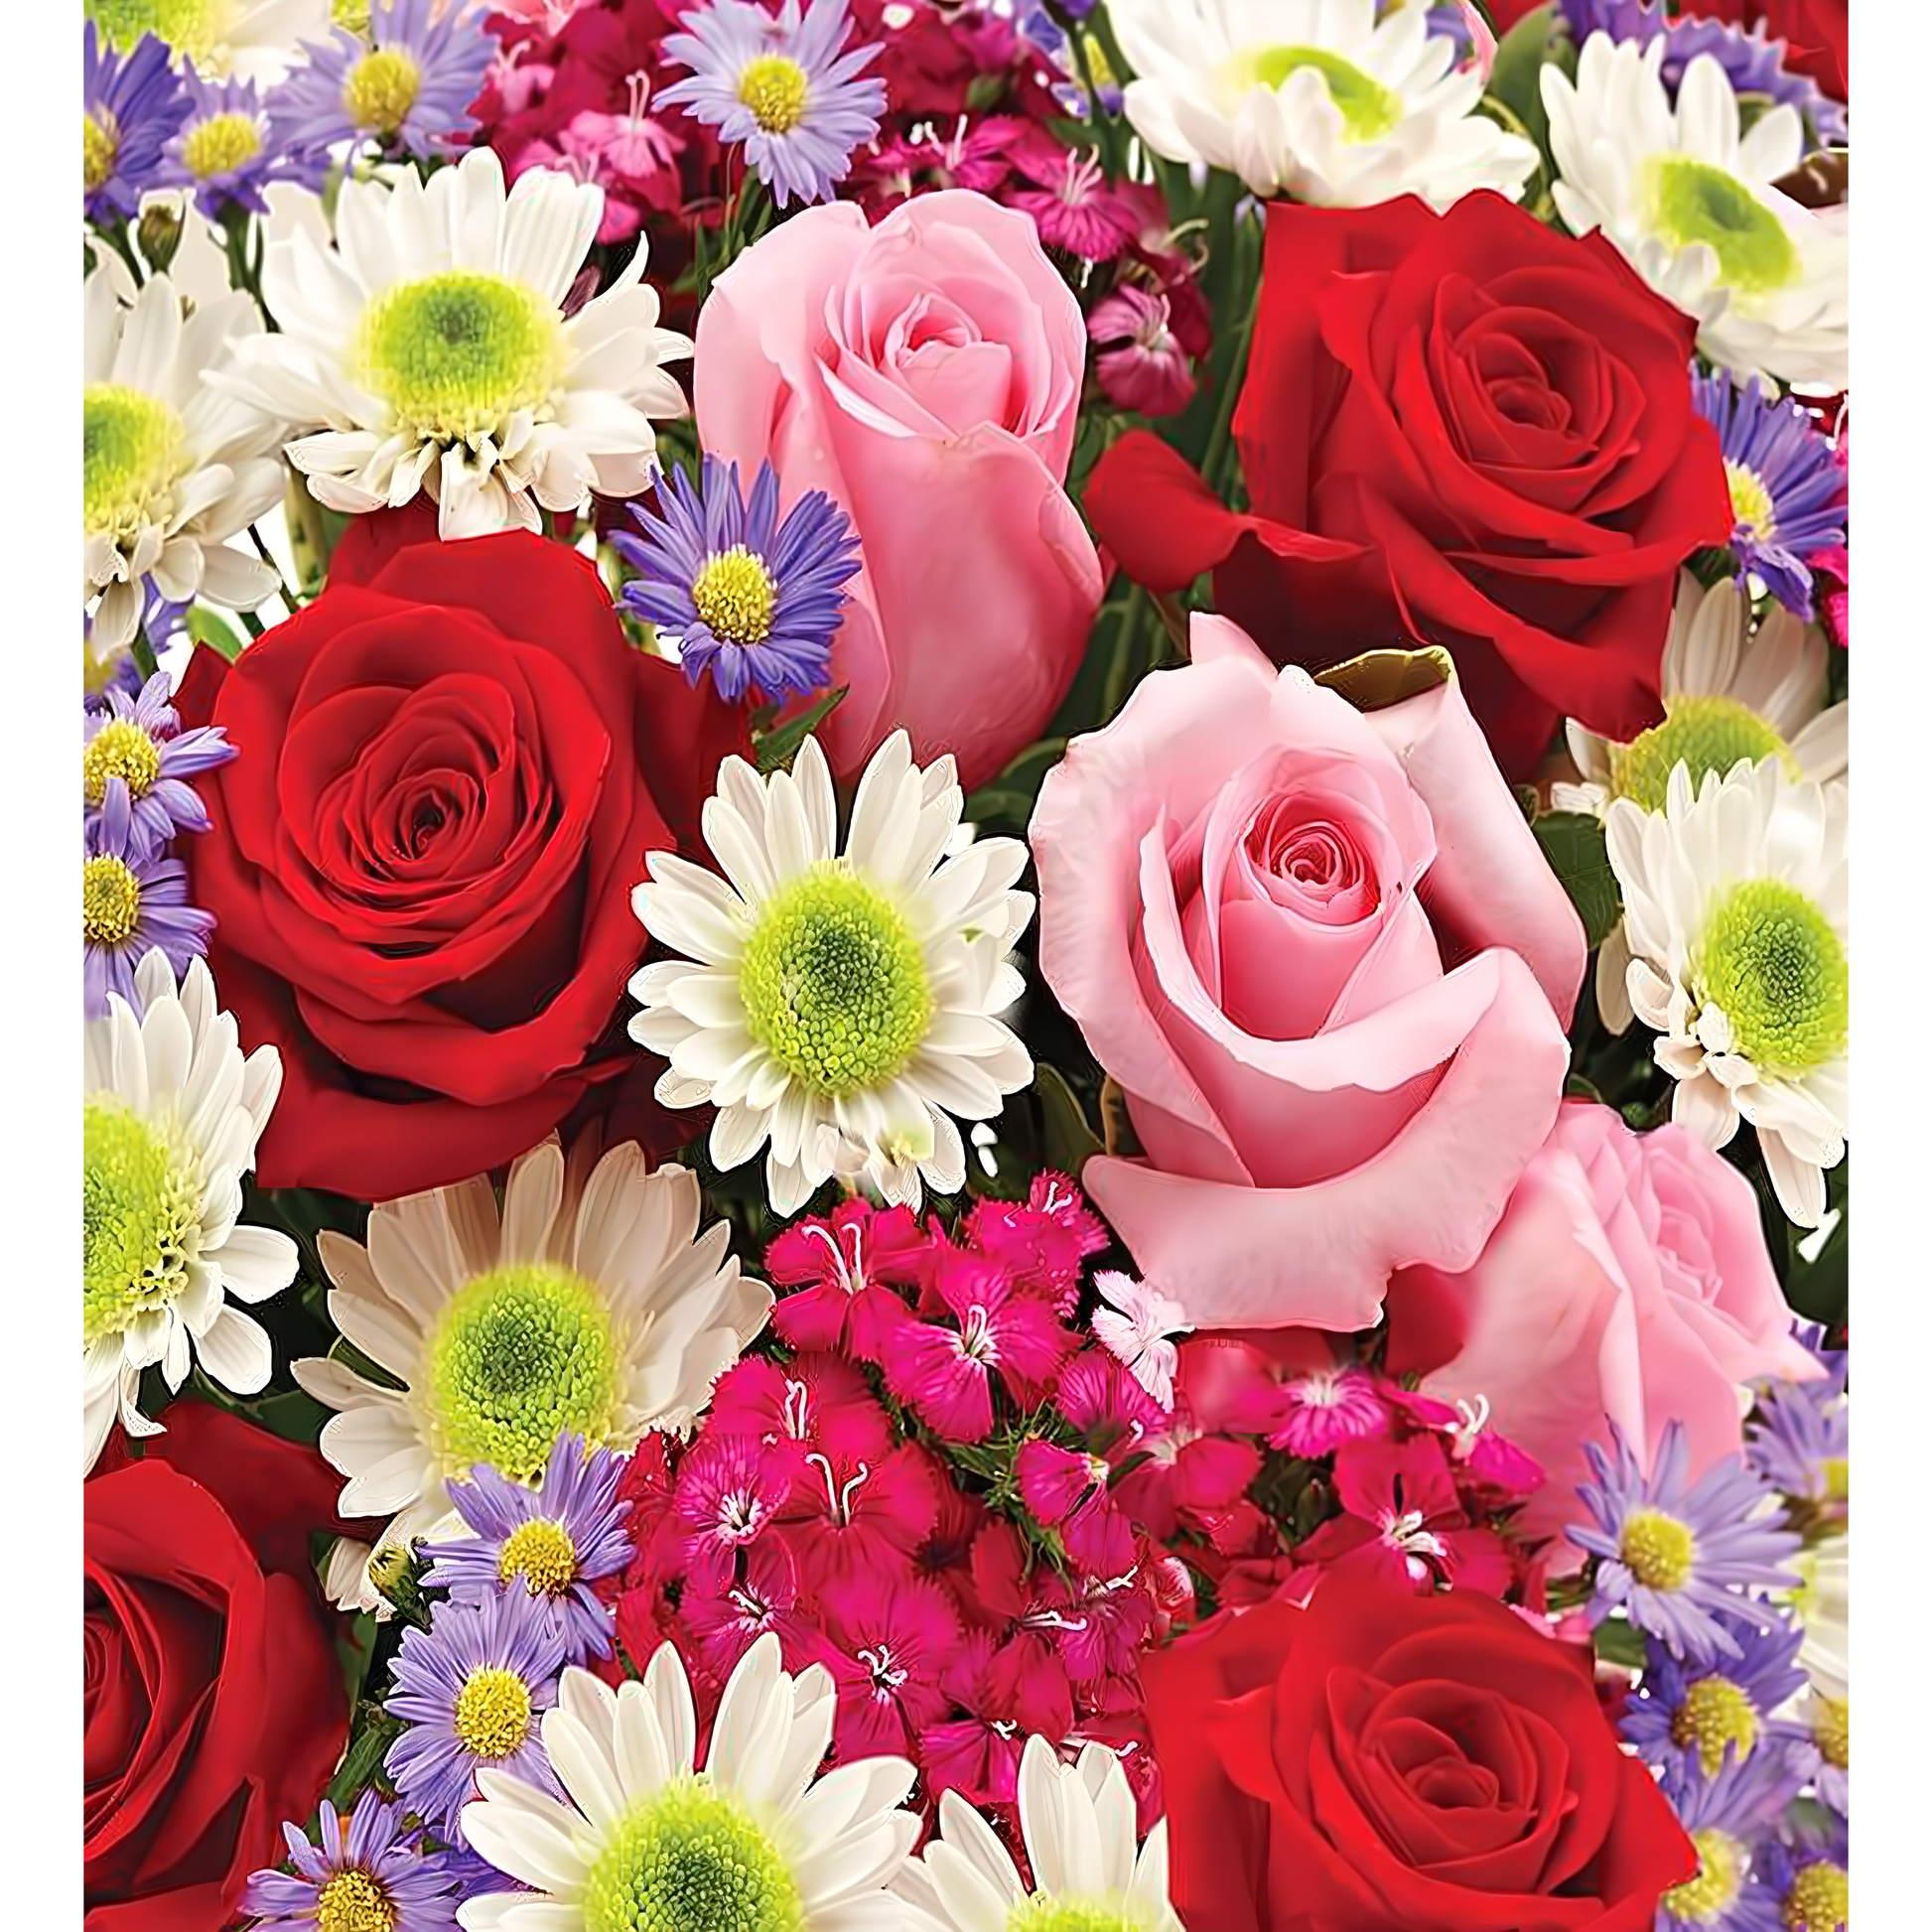 NYC Flower Delivery - Florist Choice - Occasions > Anniversary